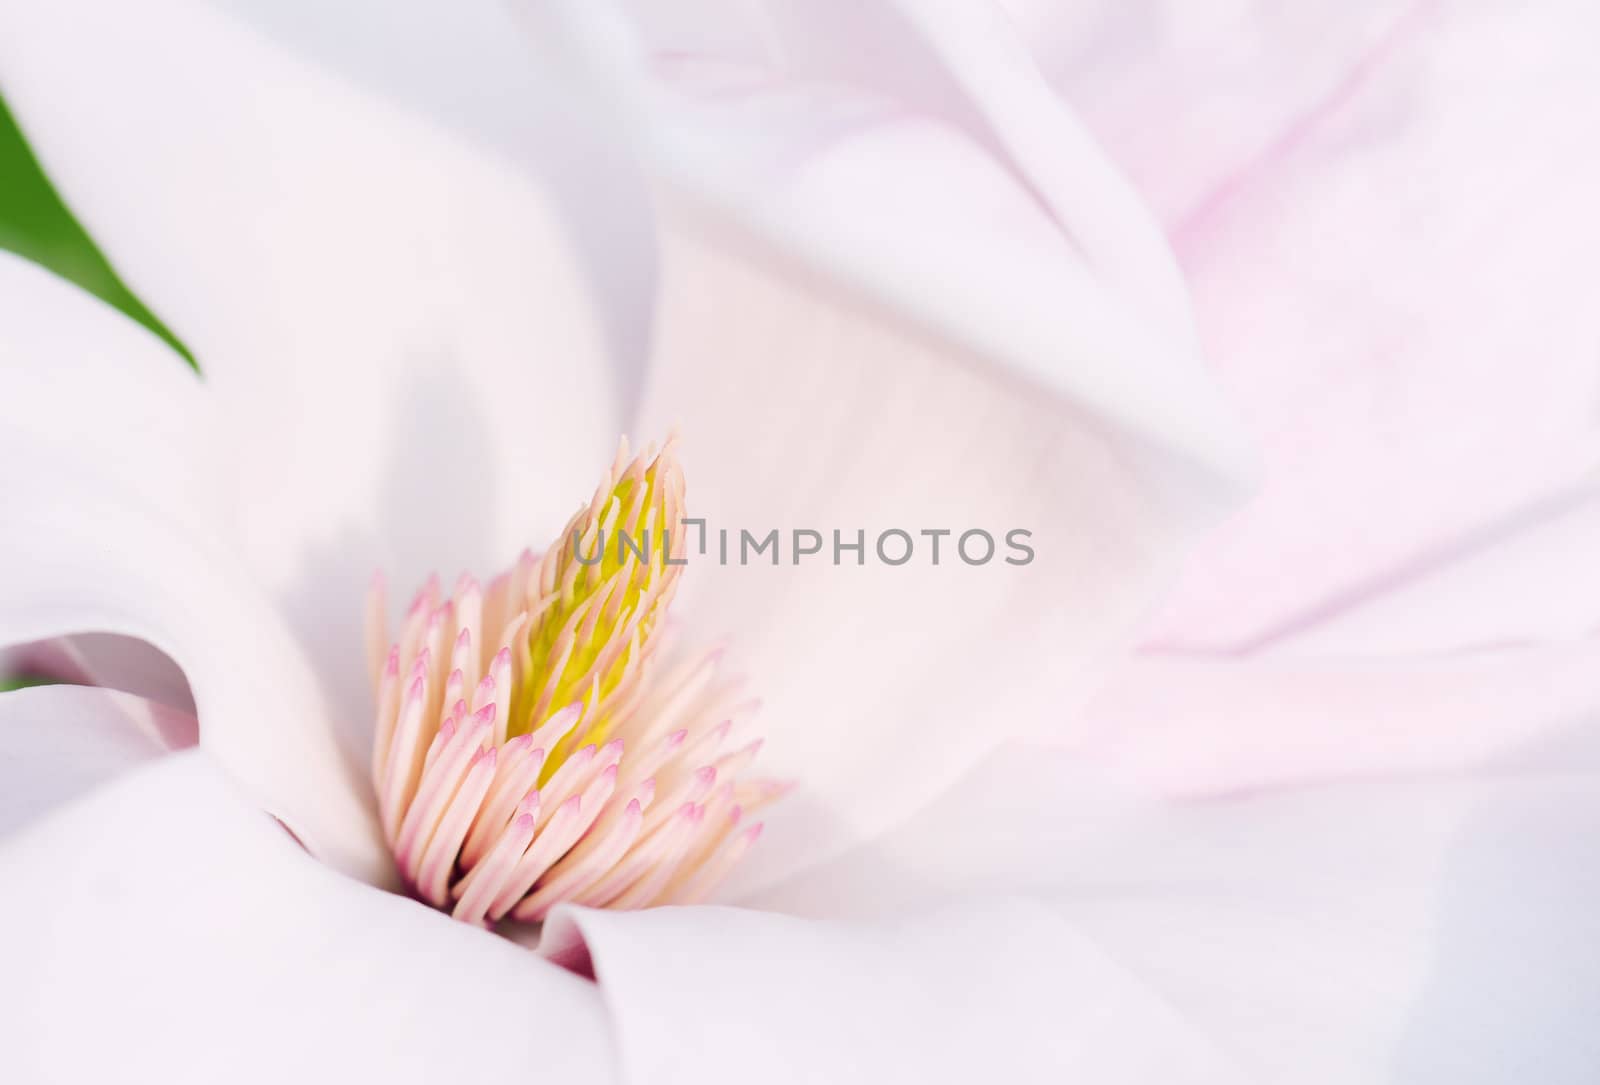 Macro Shot Of The Stigma From A Magnolia Flower